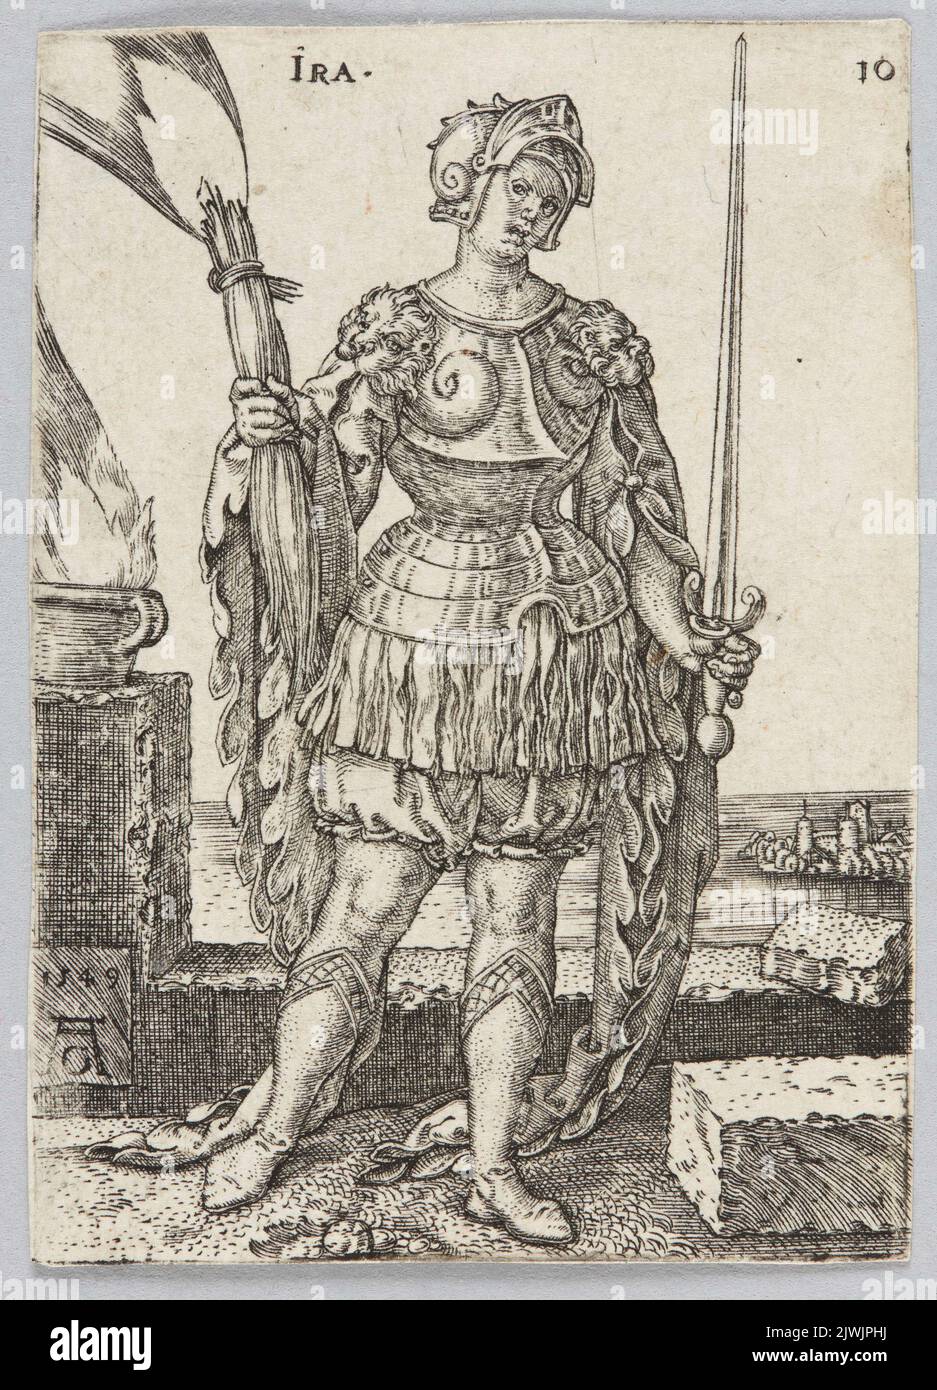 Ira, from the cycle: Allegorical figures. Aldegrever, Heinrich (1502-1555/1561), graphic artist Stock Photo